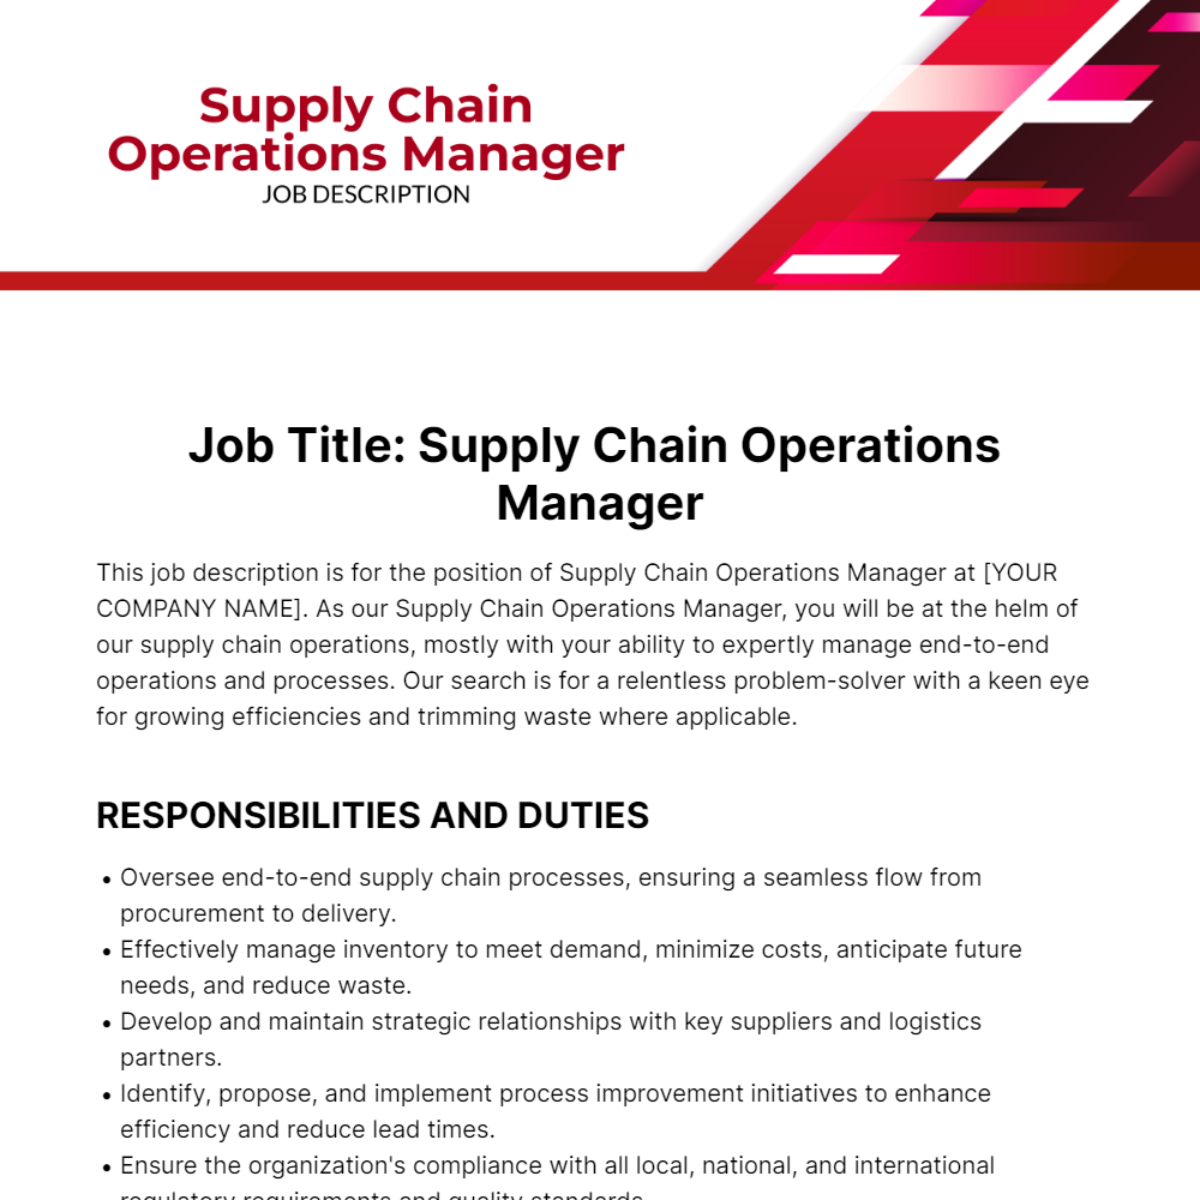 Supply Chain Operations Manager Job Description Template